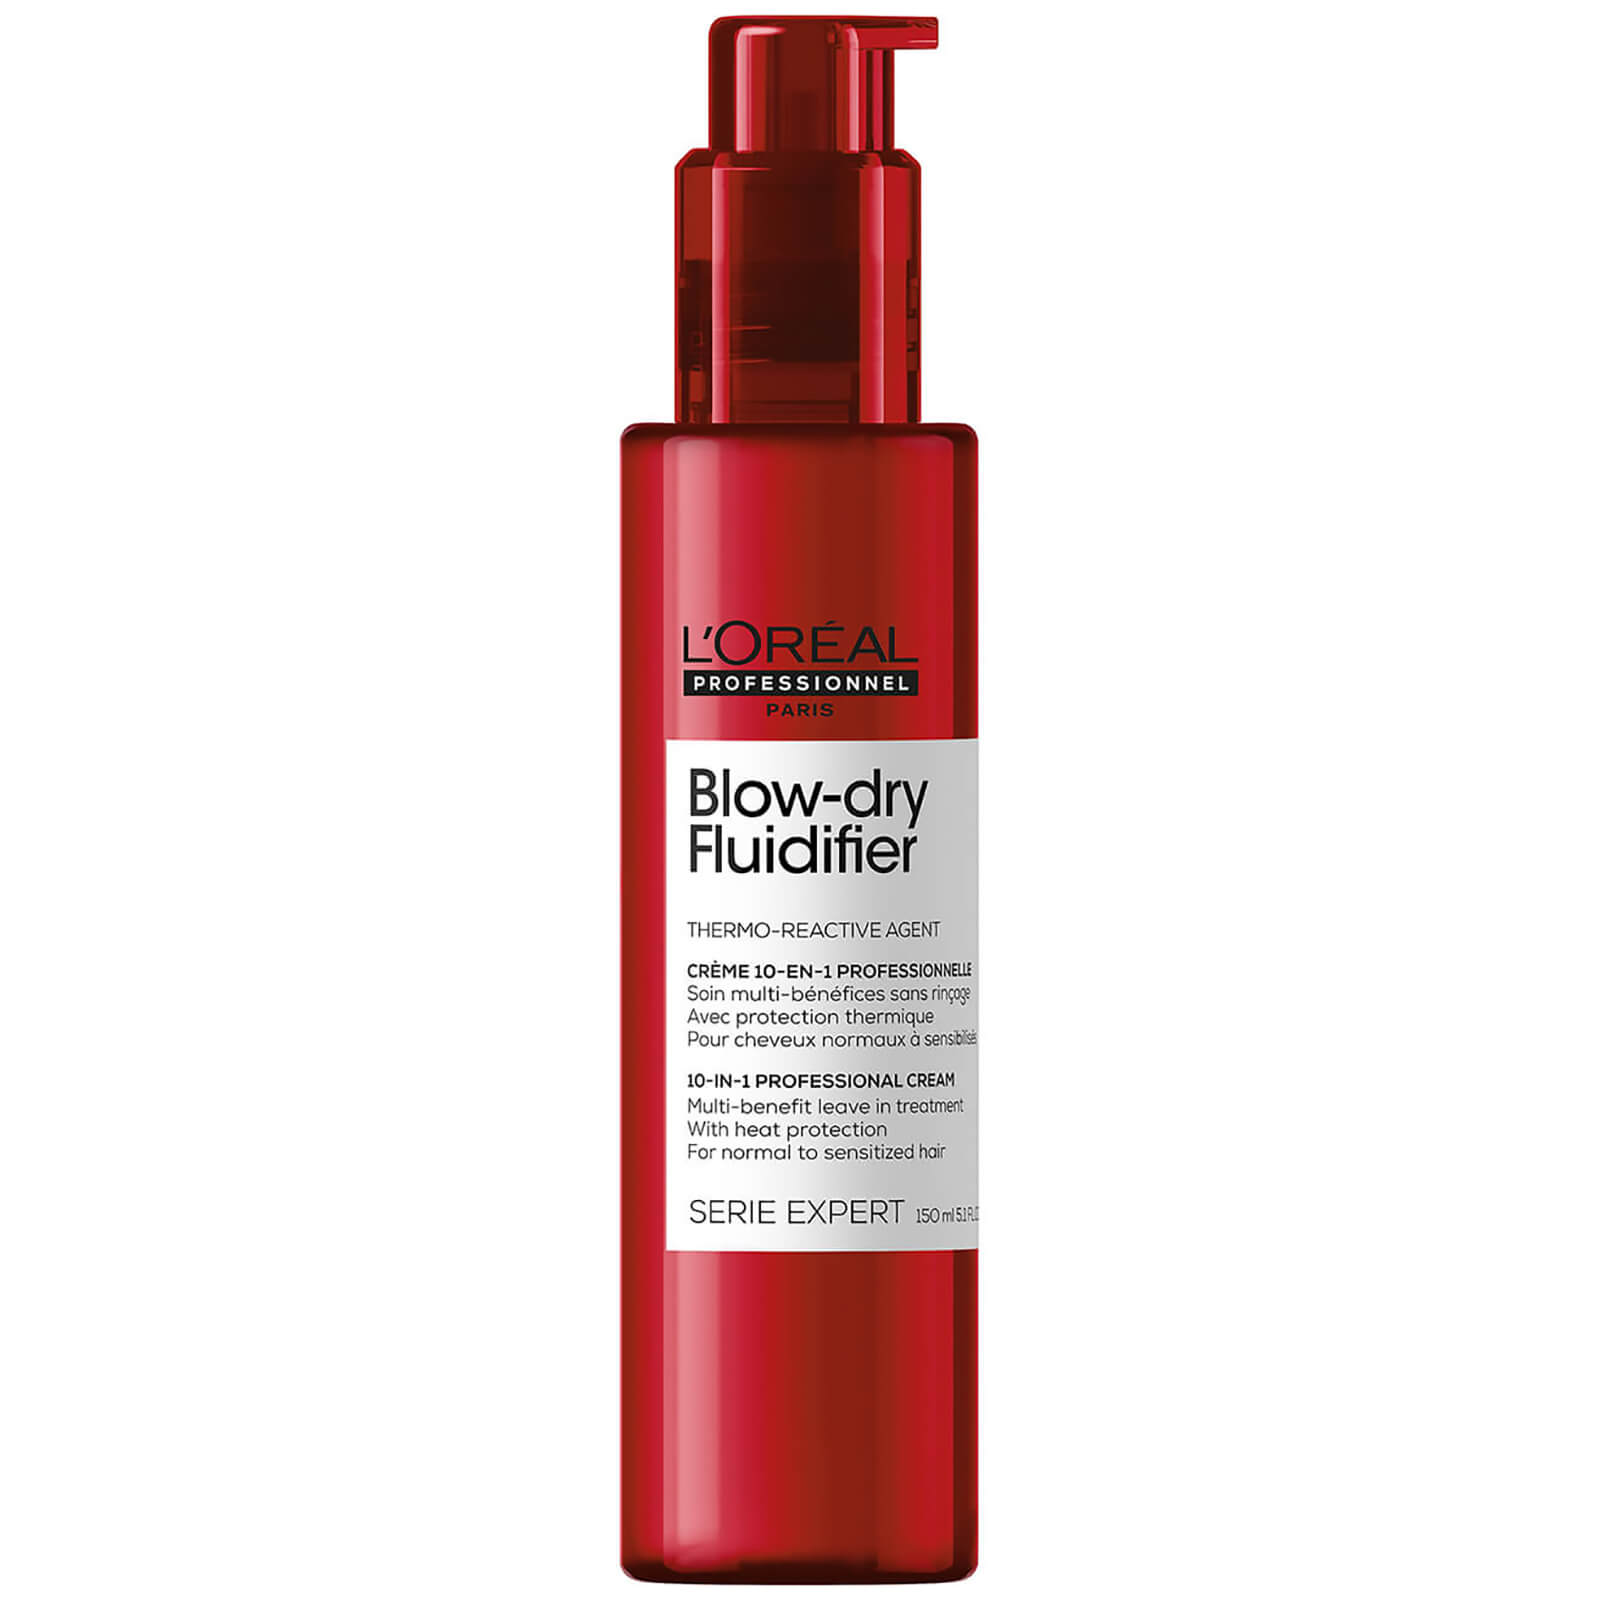 Image of Crema Blow Dry Serie Expert Blow-Dry Fluidifier Multi-Benefit with Heat Protection 1L’Oréal Professionnel 150ml